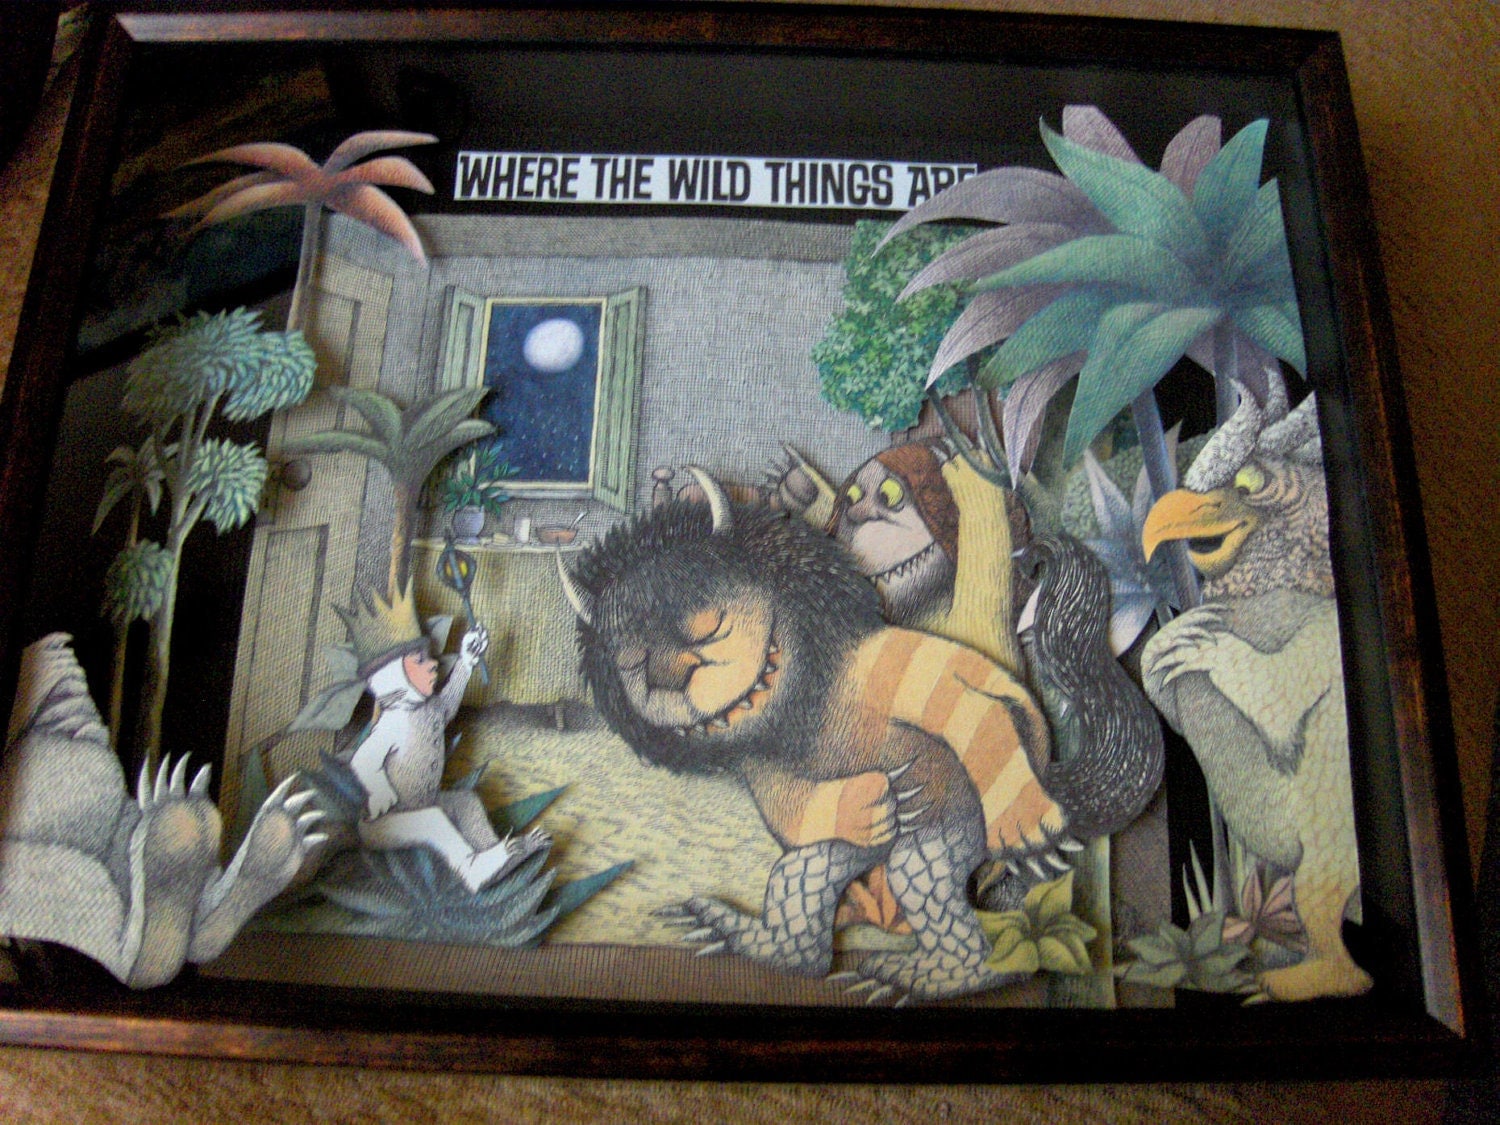 SALE - Where The Wild Things Are... - Collage of Rescued Illustrations - Altered Book Shadow Box Framed - FREE SHIPPING